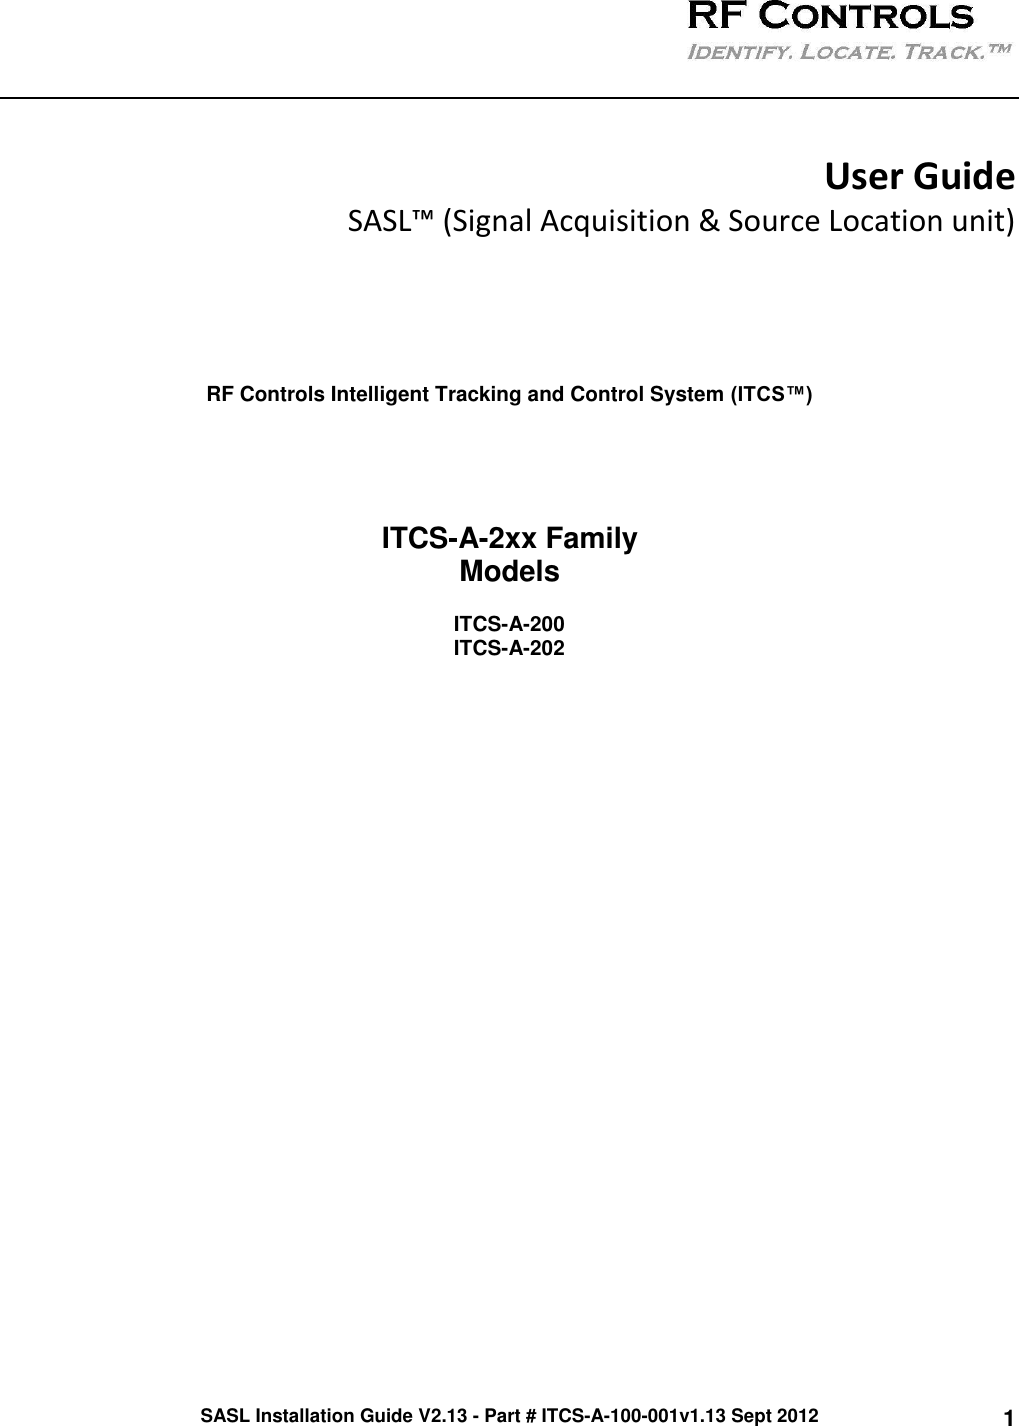 SASL Installation Guide V2.13 - Part # ITCS-A-100-001v1.13 Sept 2012 1    User Guide  SASL™ (Signal Acquisition &amp; Source Location unit)      RF Controls Intelligent Tracking and Control System (ITCS™)     ITCS-A-2xx Family  Models  ITCS-A-200 ITCS-A-202 